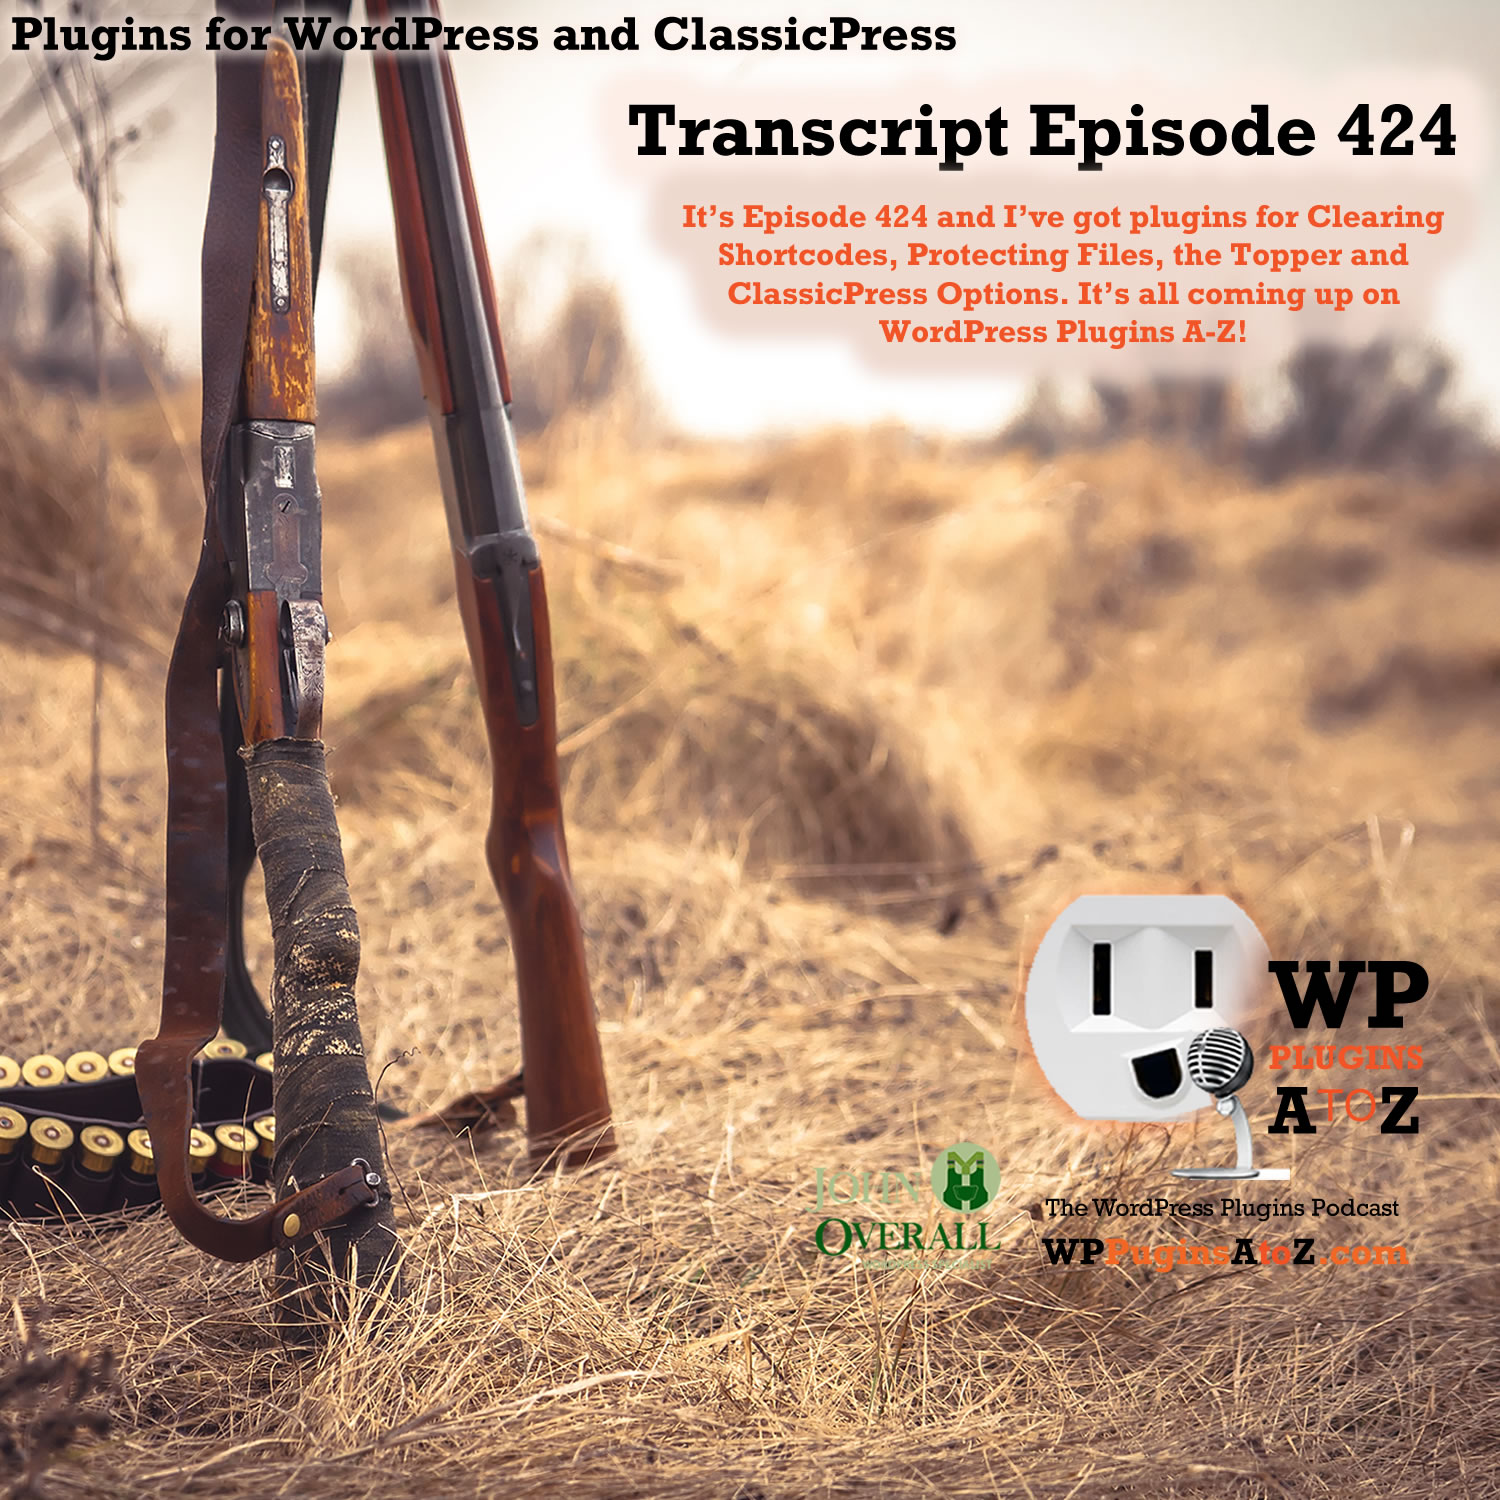 It’s Episode 424 and I’ve got plugins for Clearing Shortcodes, Protecting Files, the Topper and ClassicPress Options, all coming up on WordPress Plugins A-Z!